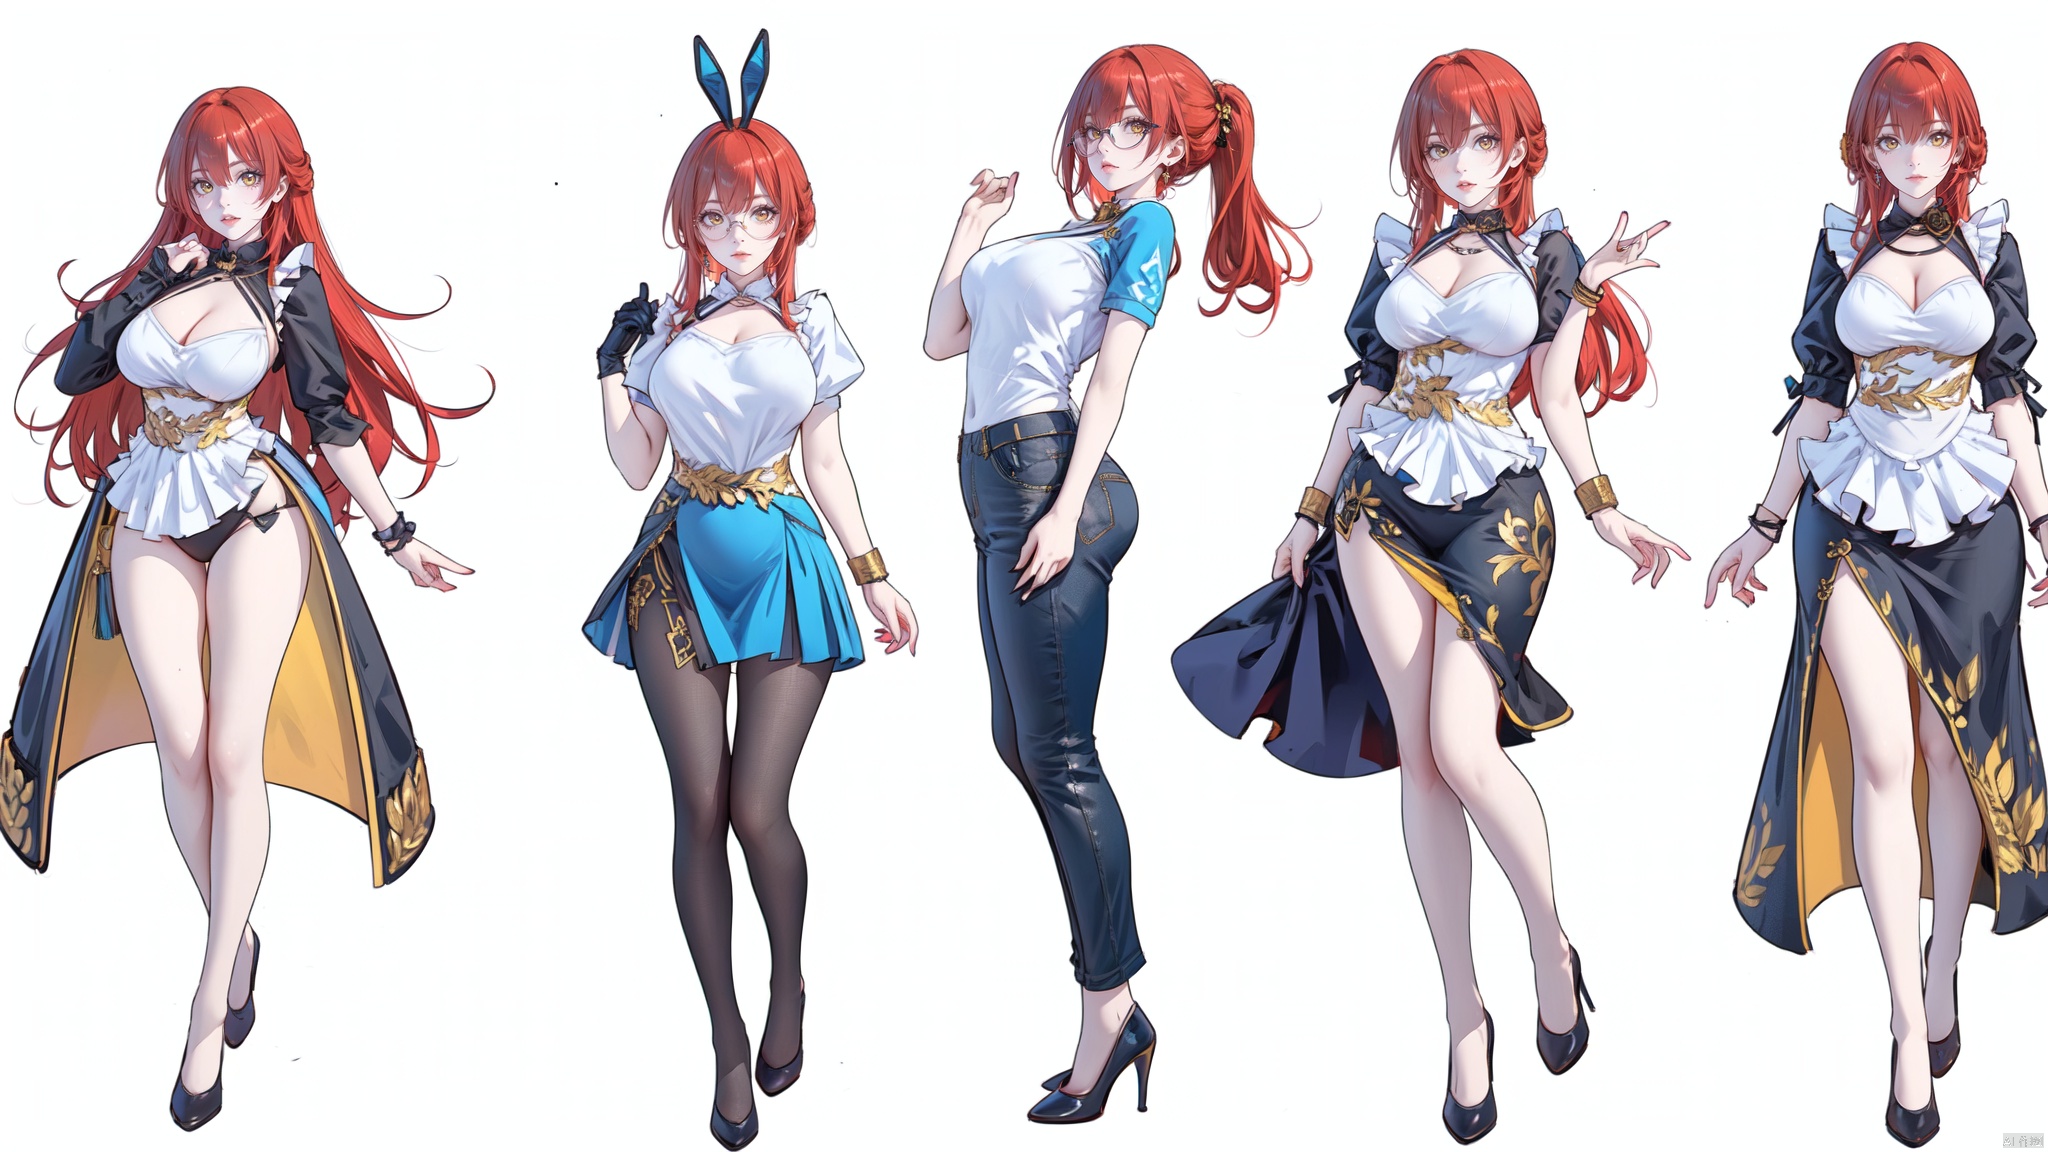  8k, best quality, masterpiece, (ultra-detailed:1.1), (high detailed skin),
(full body:1.3),
////////////////////////
jizi,1girl,red hair,yellow eyes,long hair,bangs,breasts,
///////////////////////////////
clothesviews,Differentclothes,Dress-updisplay,multipleviews,maid,t-shirt,blue_jeans,glasses,bunny_suit ,sports_uniform,nurse,white background, simple background,
\\\\\\\\\\\\\\\\\\\\\\
(beautiful_face), ((intricate_detail)), clear face,
((finely_detailed)), fine_fabric_emphasis,
((glossy)), full_shot, Anime, melowh, Art style, fantasy